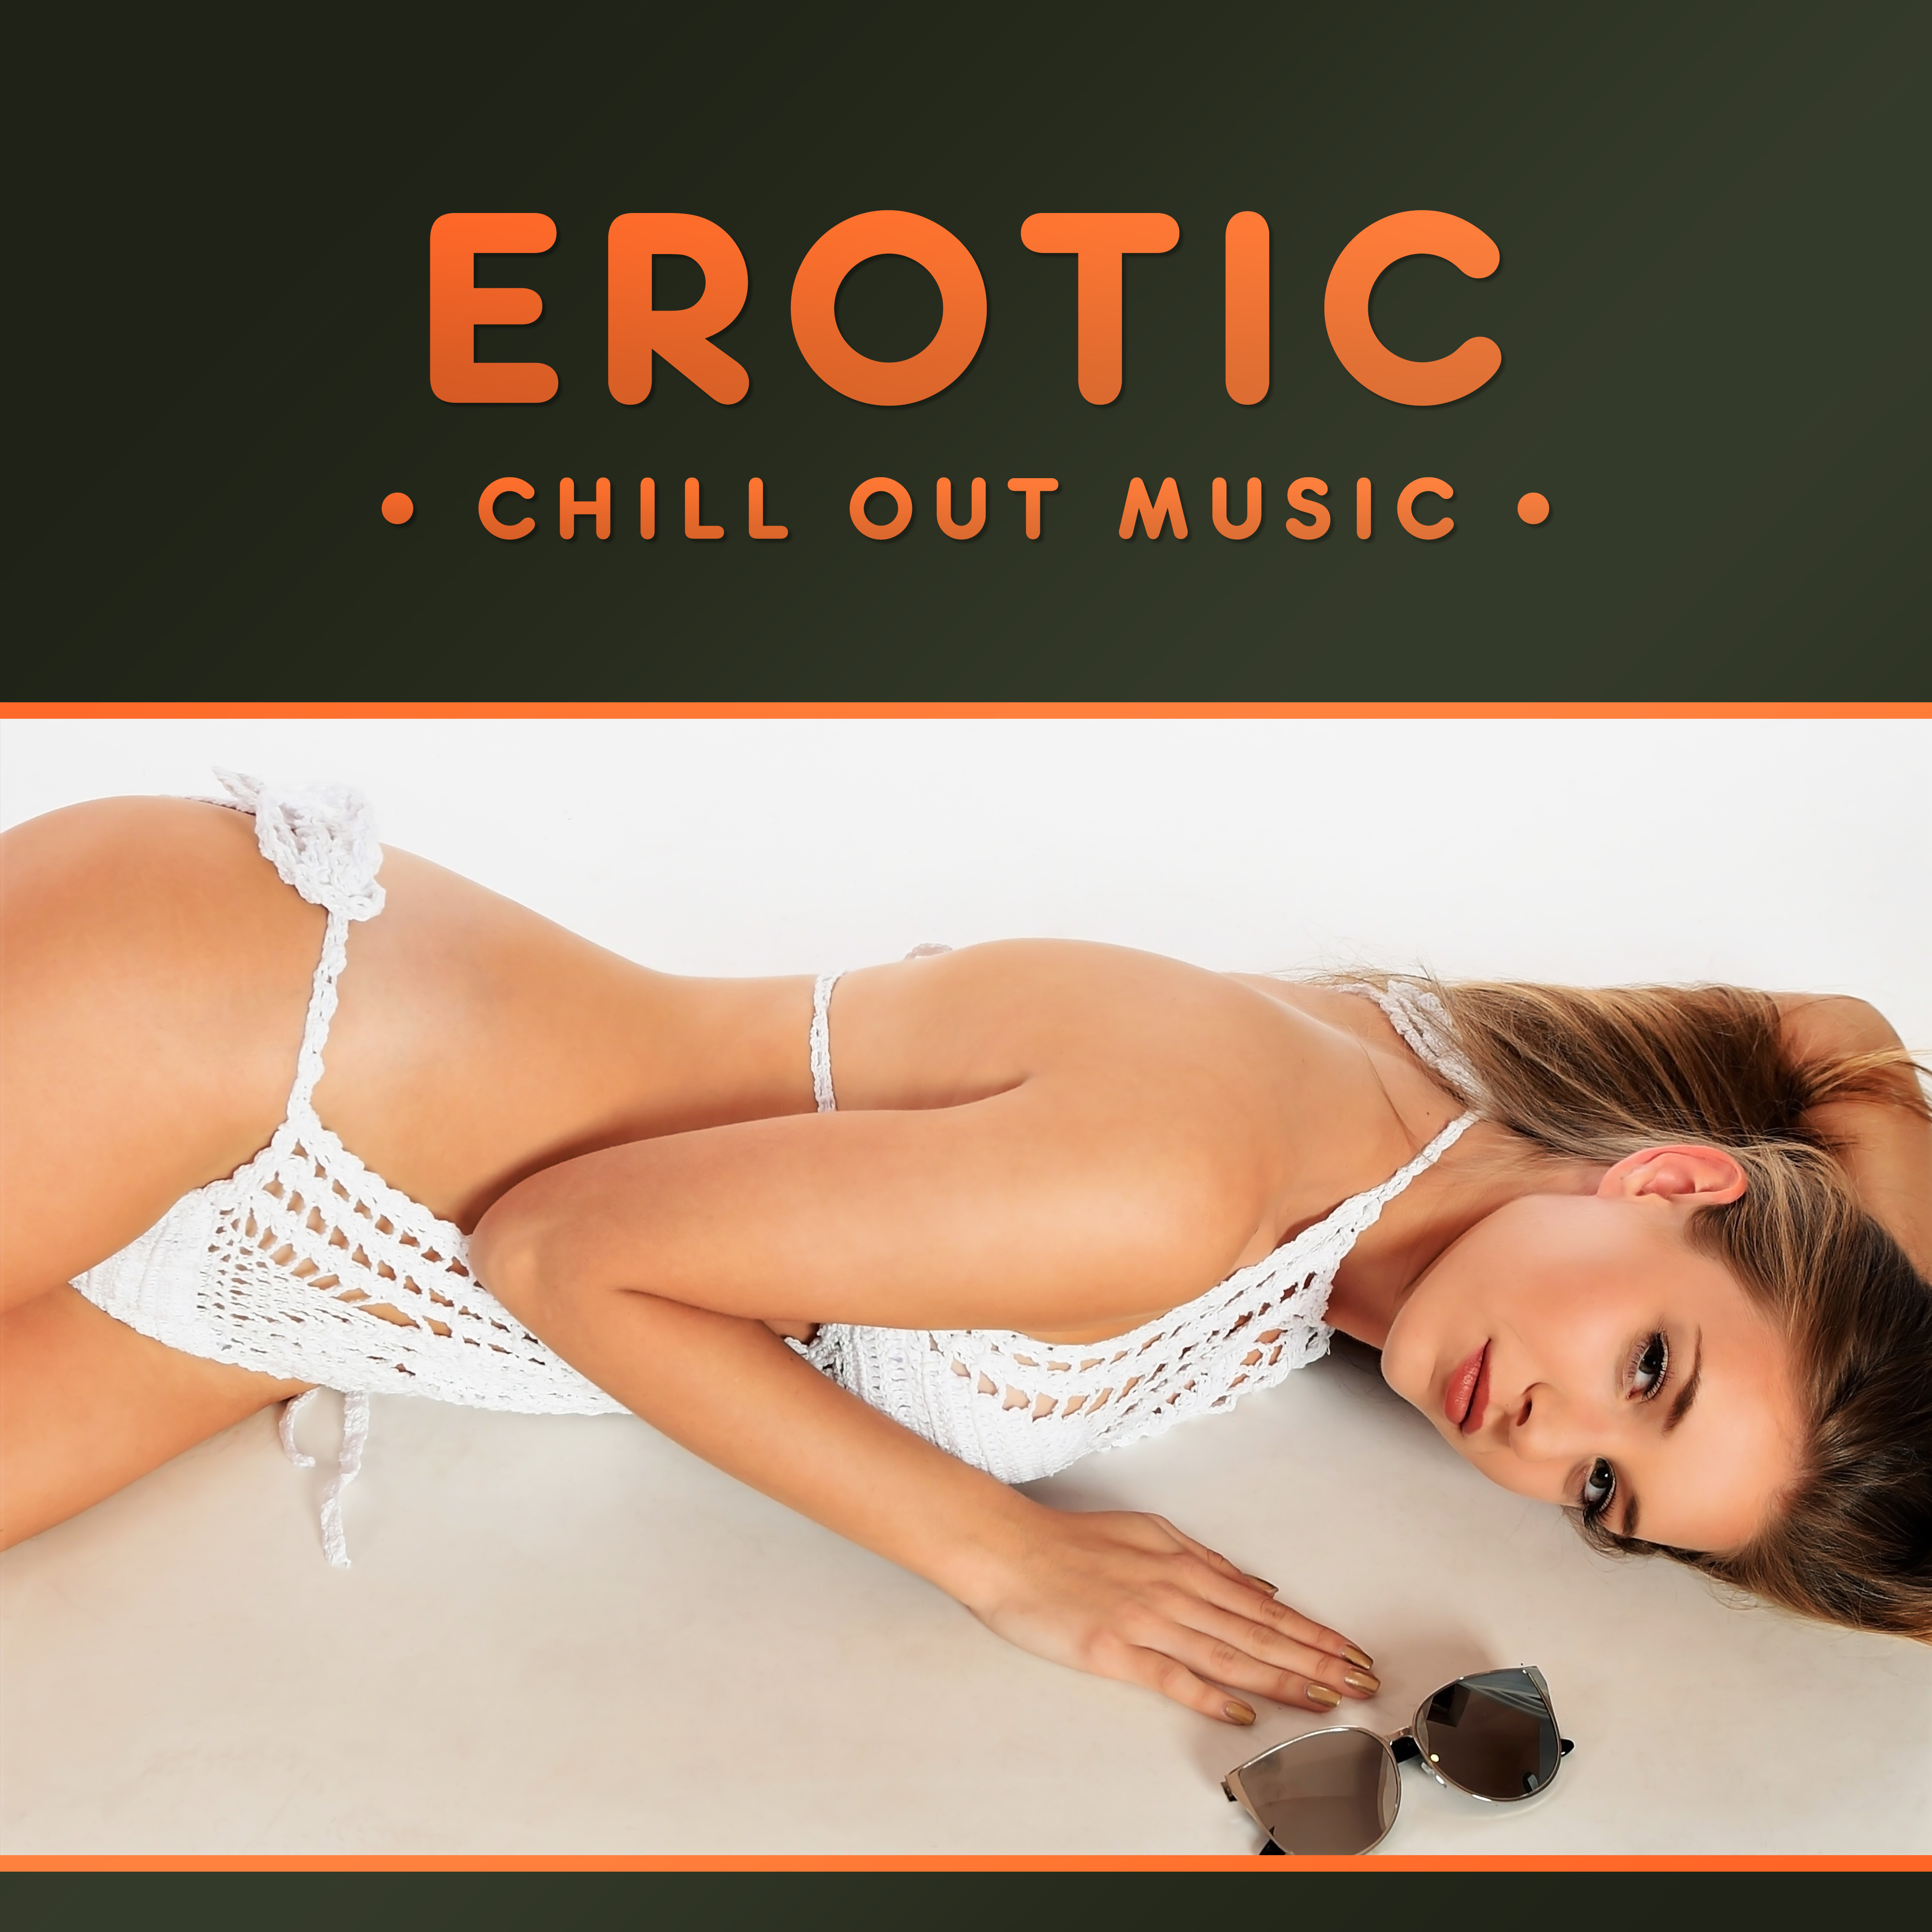 Erotic Chill Out Music  Soft Chill for Summer Lovers, Holiday Romance, Beach Lounge,  Dance